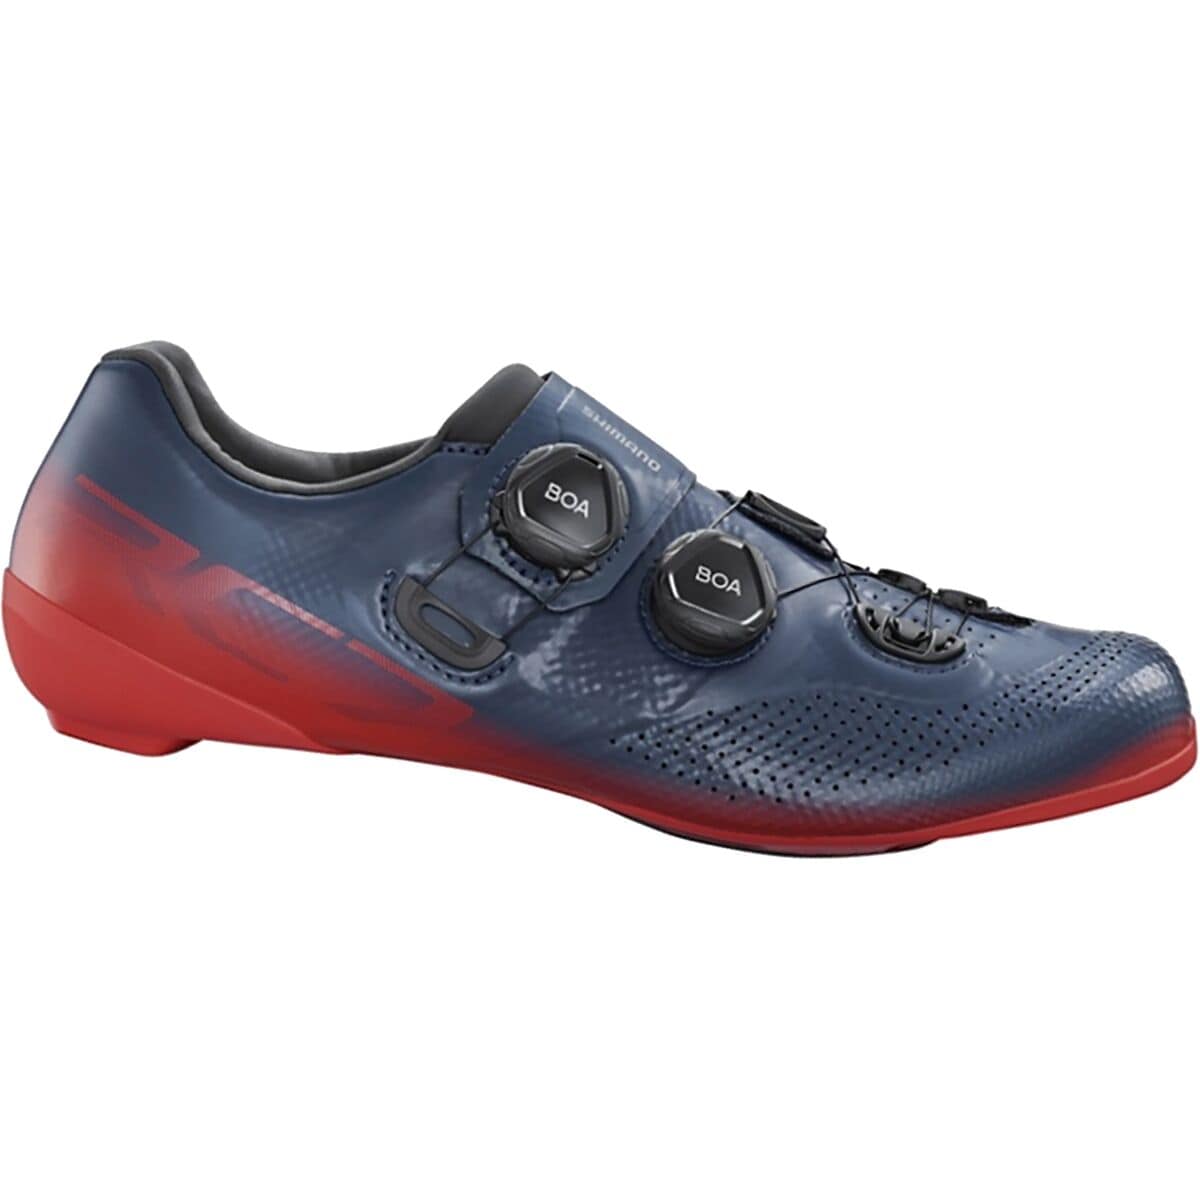 Shimano RC702 Limited Edition Wide Cycling Shoe - Men's